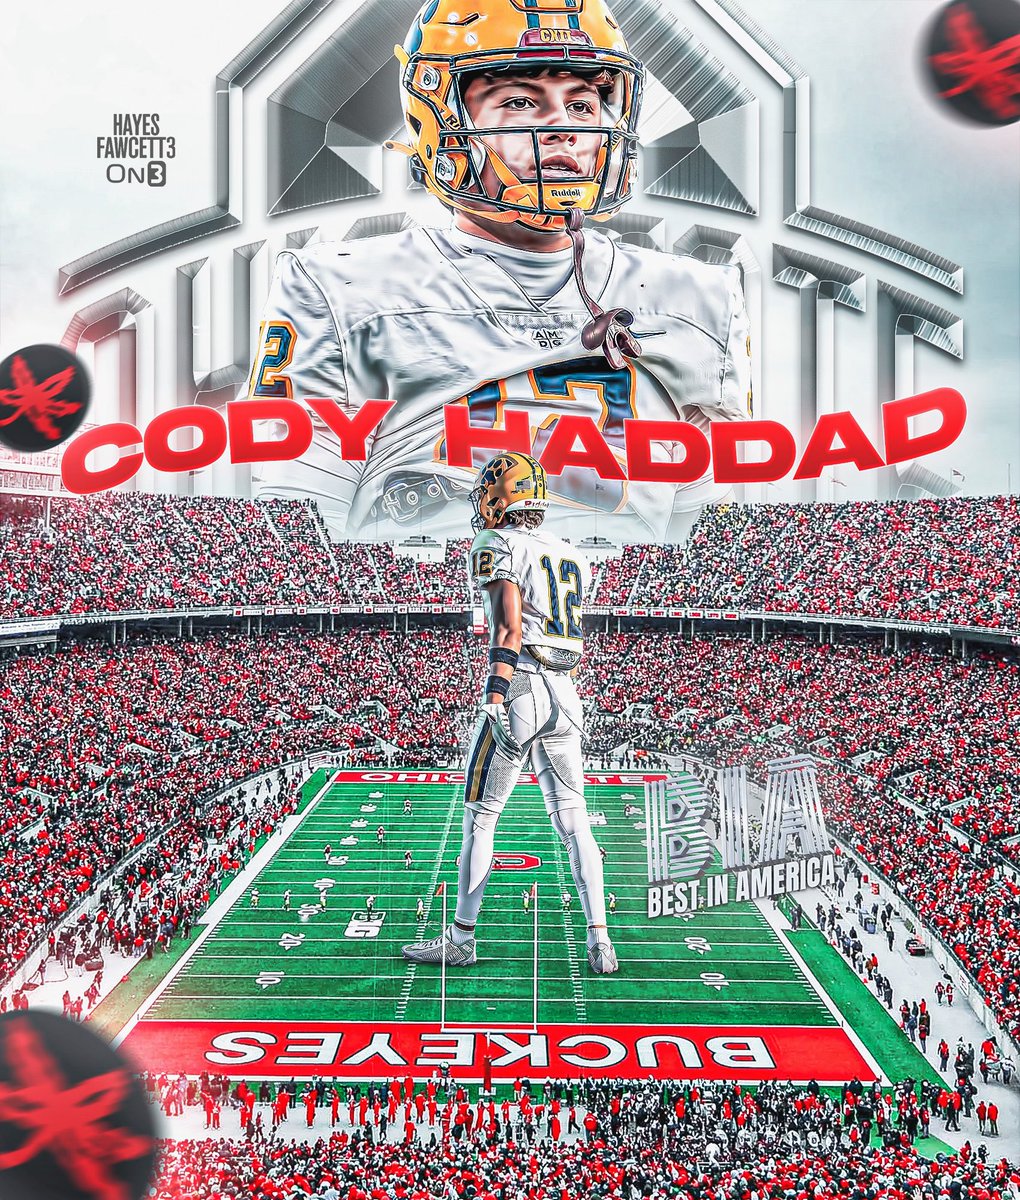 BREAKING: Class of 2025 Safety Cody Haddad has Committed to Ohio State, he tells me for @on3recruits The 6’1 180 S from Cleveland, OH chose the Buckeyes over Wisconsin, Texas A&M, & Purdue “I’m staying home, GO BUCKS” on3.com/db/cody-haddad…